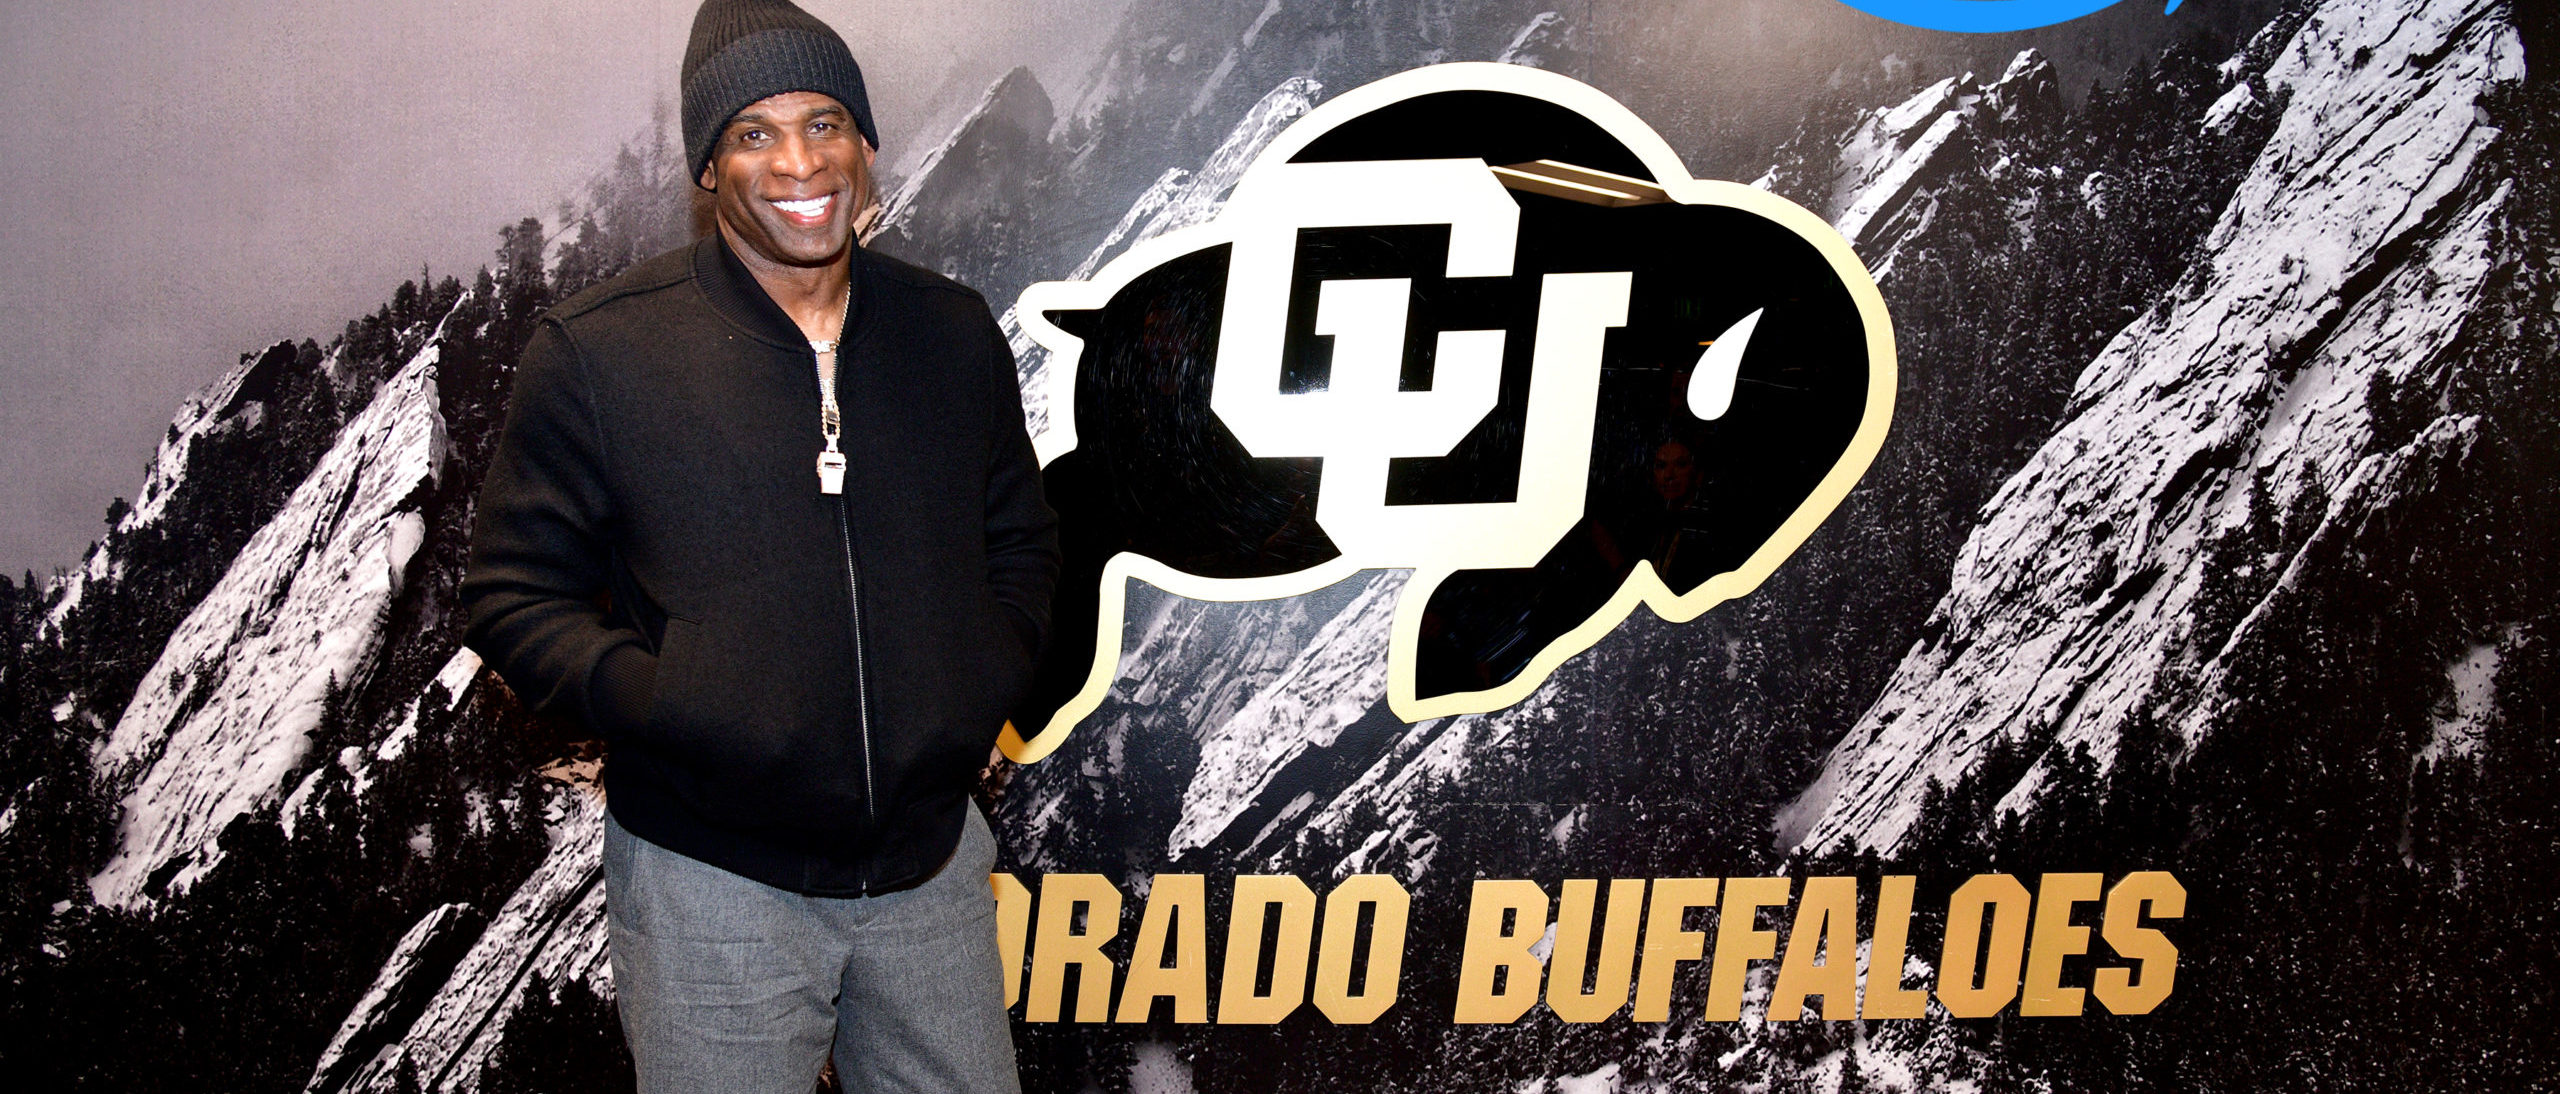 Deion Sanders Claims He Wants To Retire At Colorado, But I’m Not Buying It